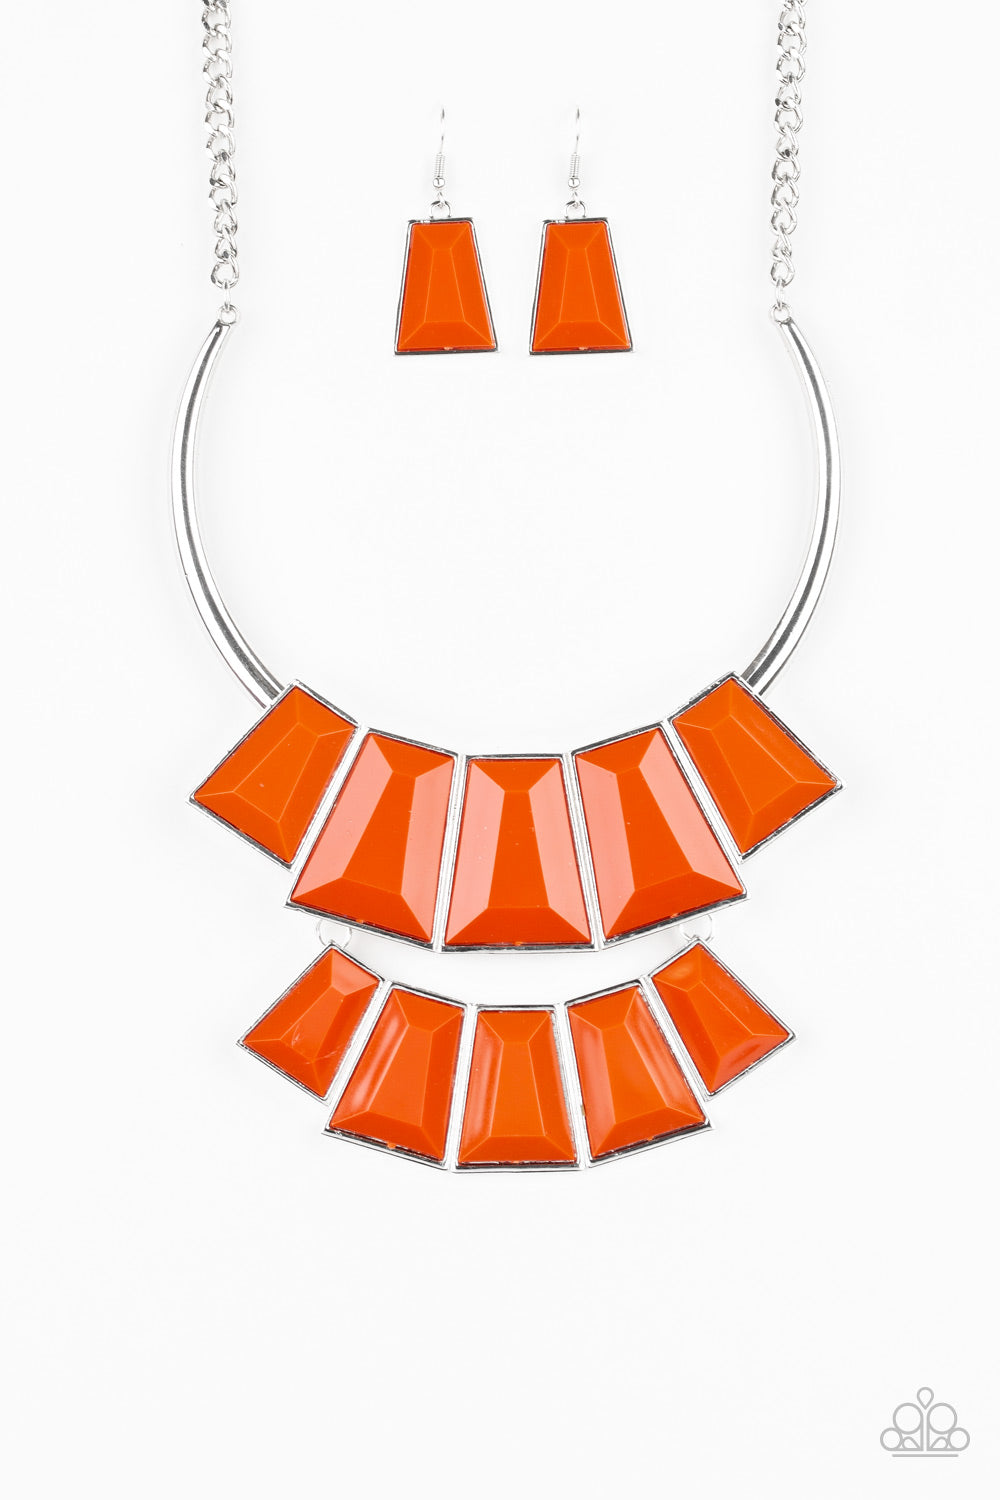 Lions, TIGRESS, And Bears Necklace__Orange